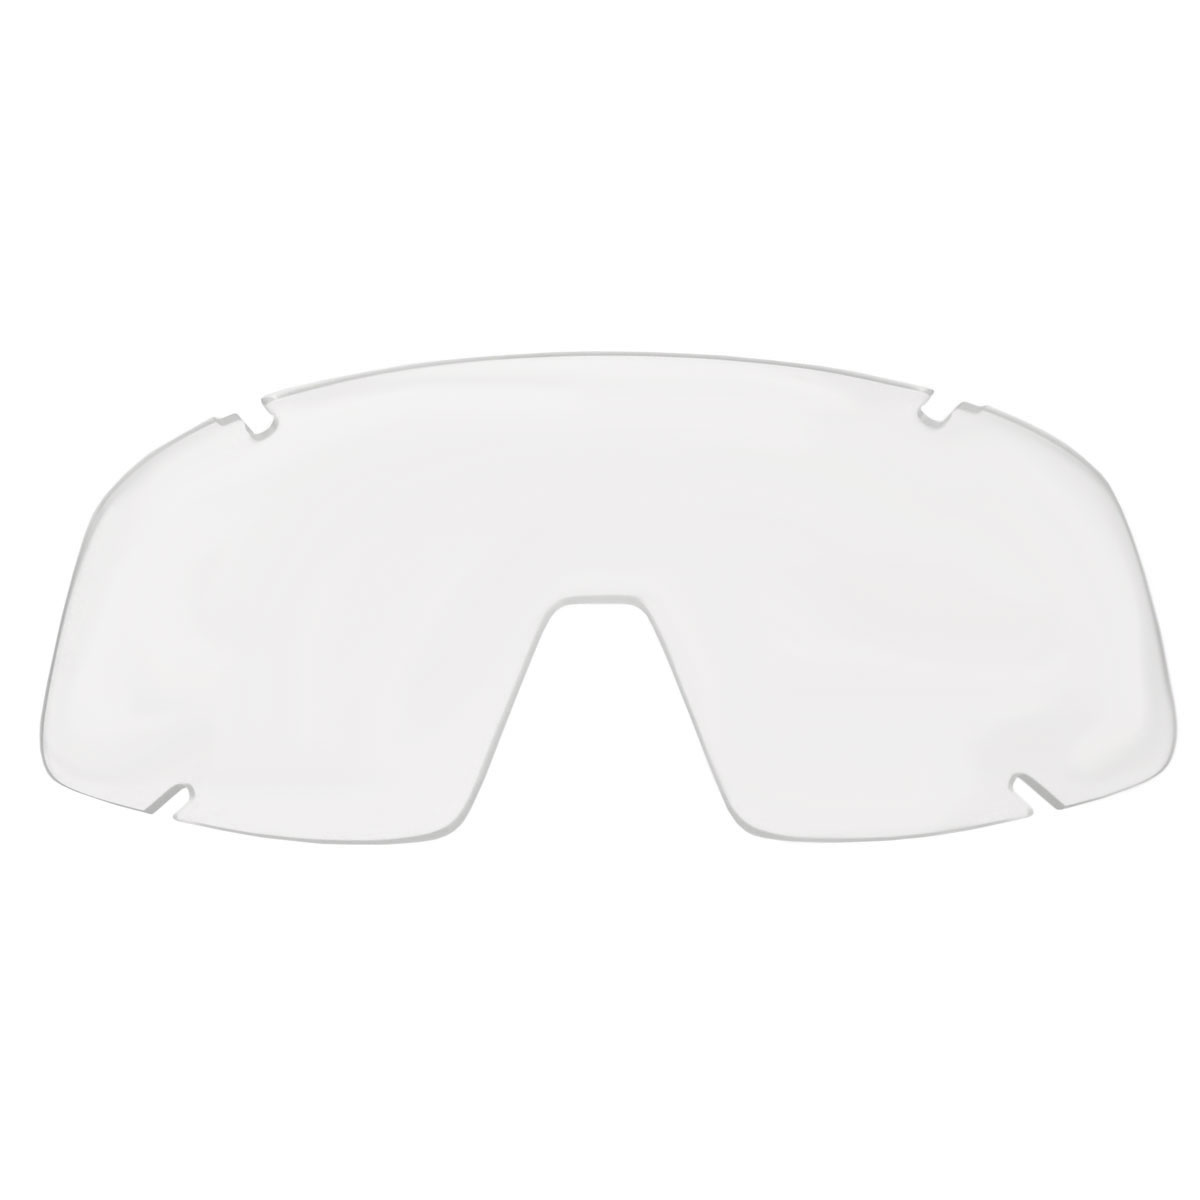 Image of Alpina Hawkeye Replacement Lens - Ceramic Clear Cat. 0